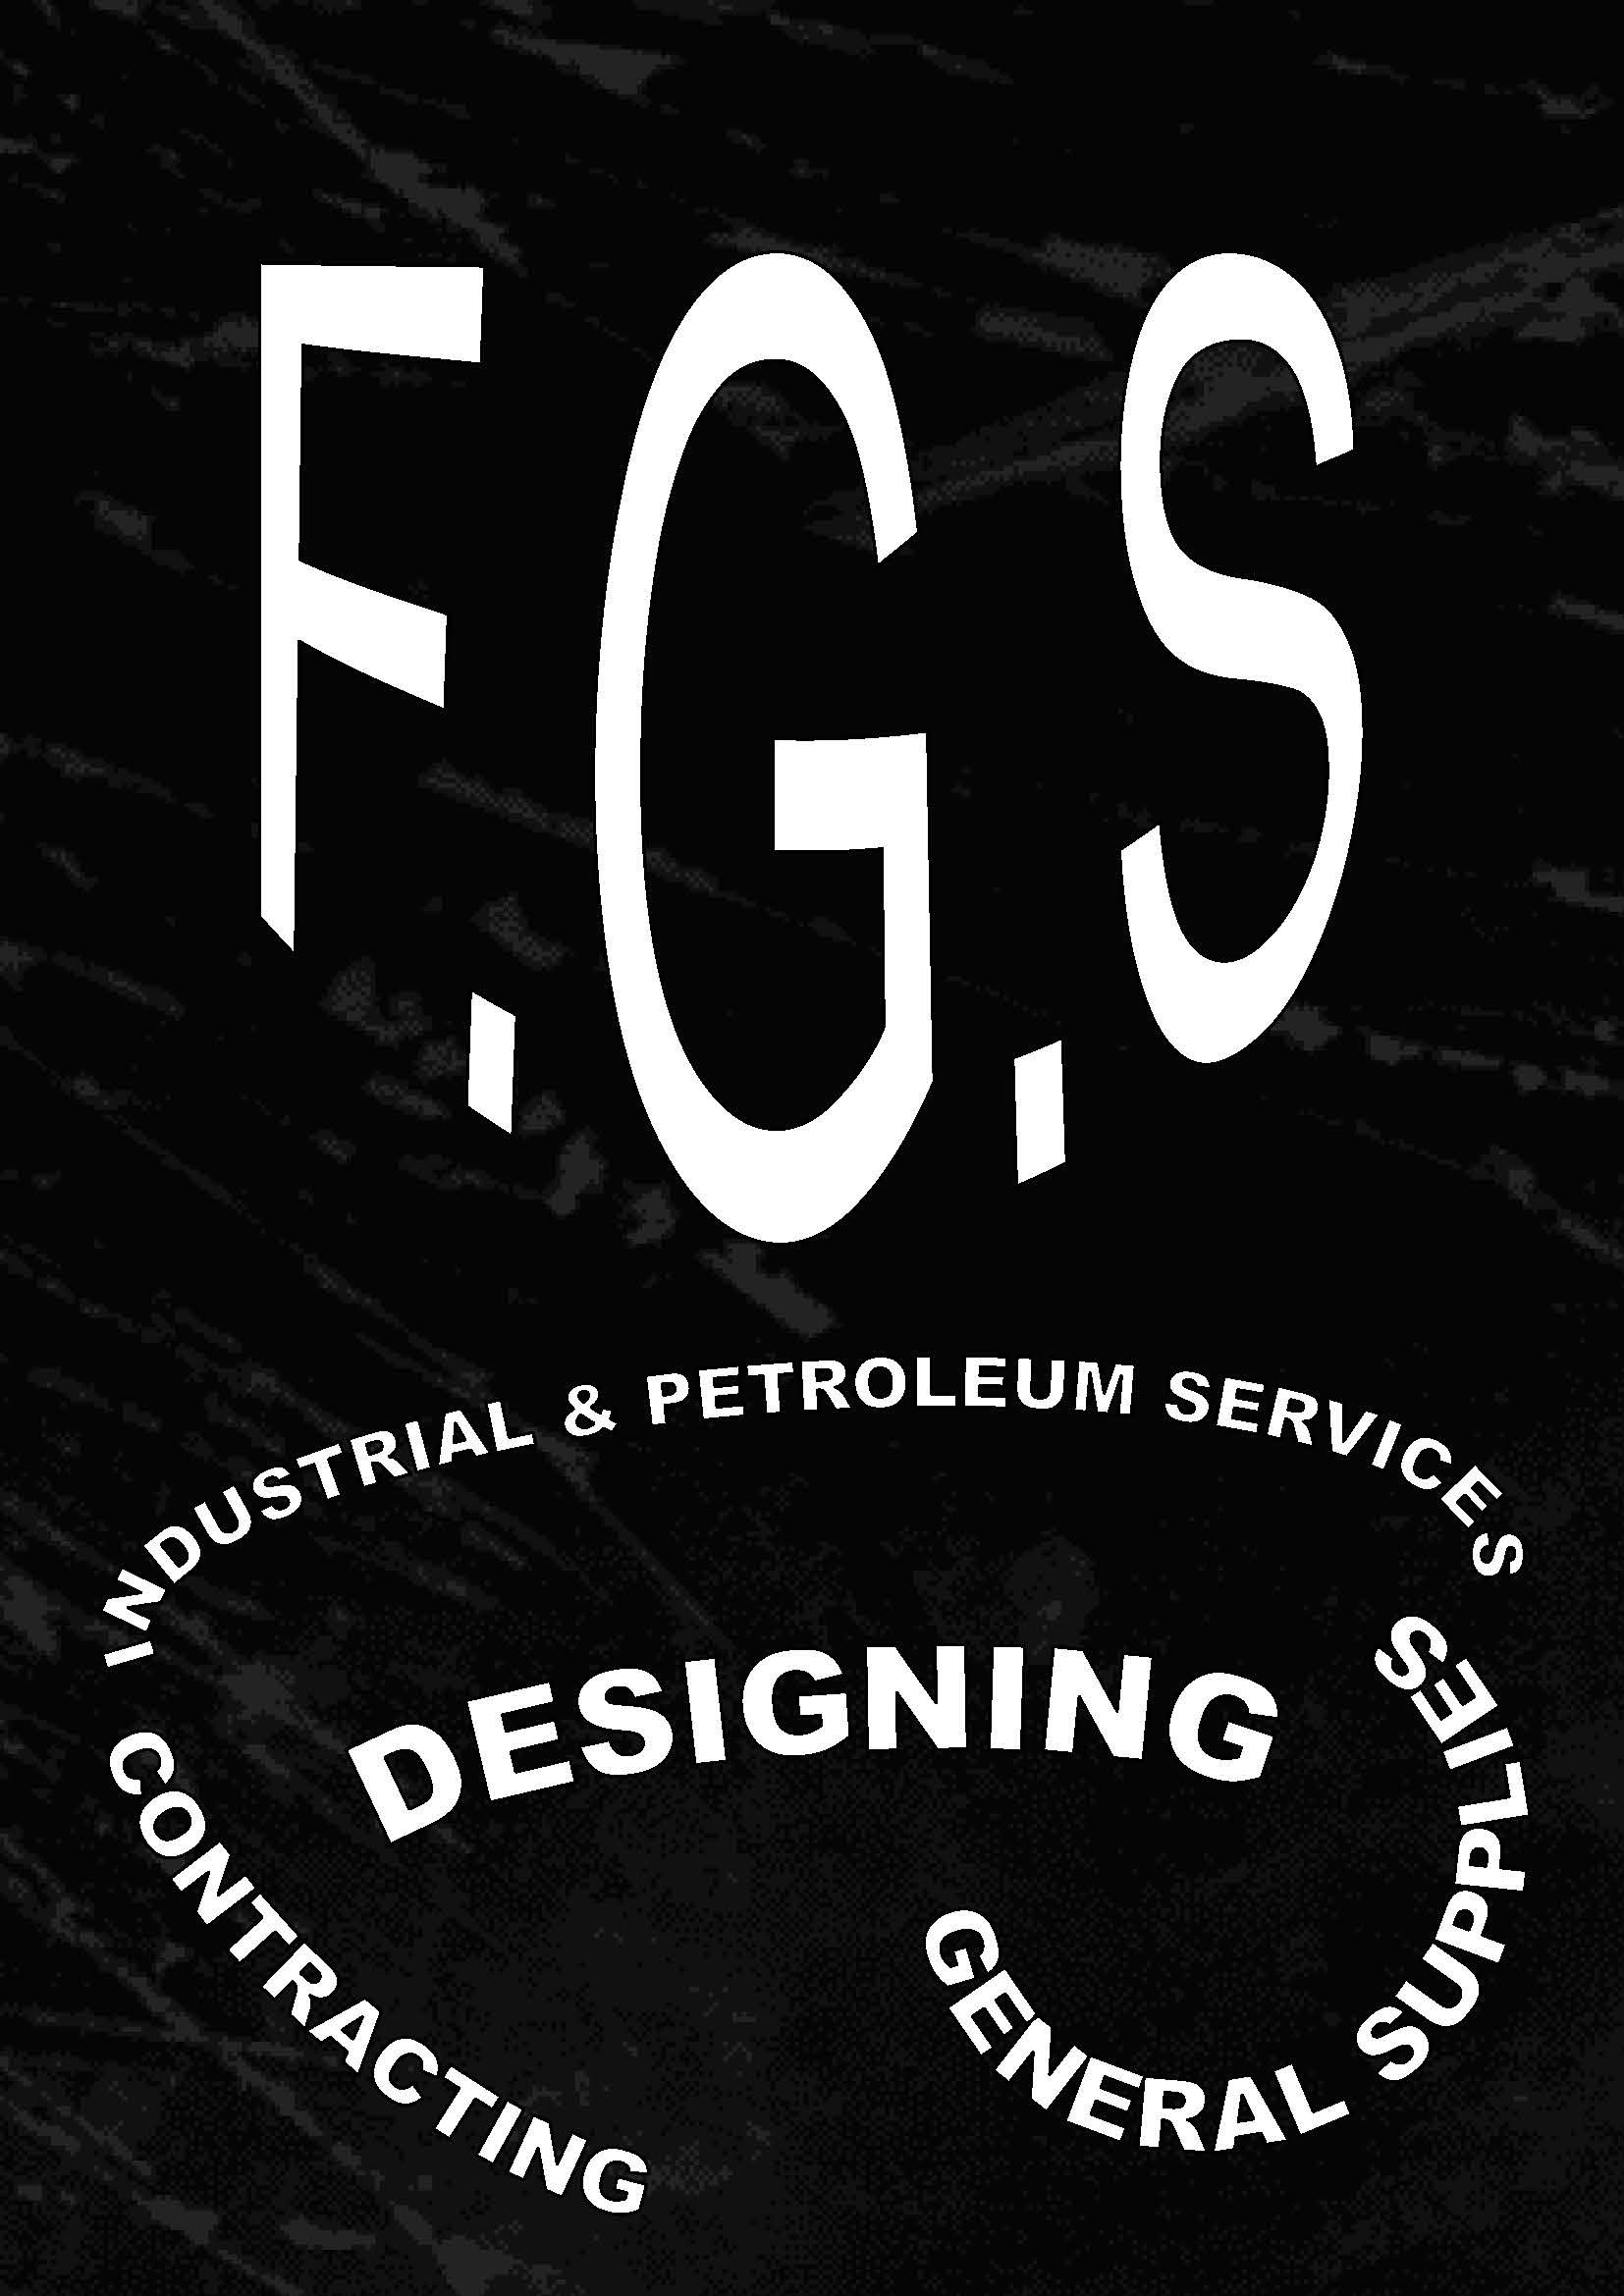 Ferotal General Contracting & Supplies (F.G.S) Main Image